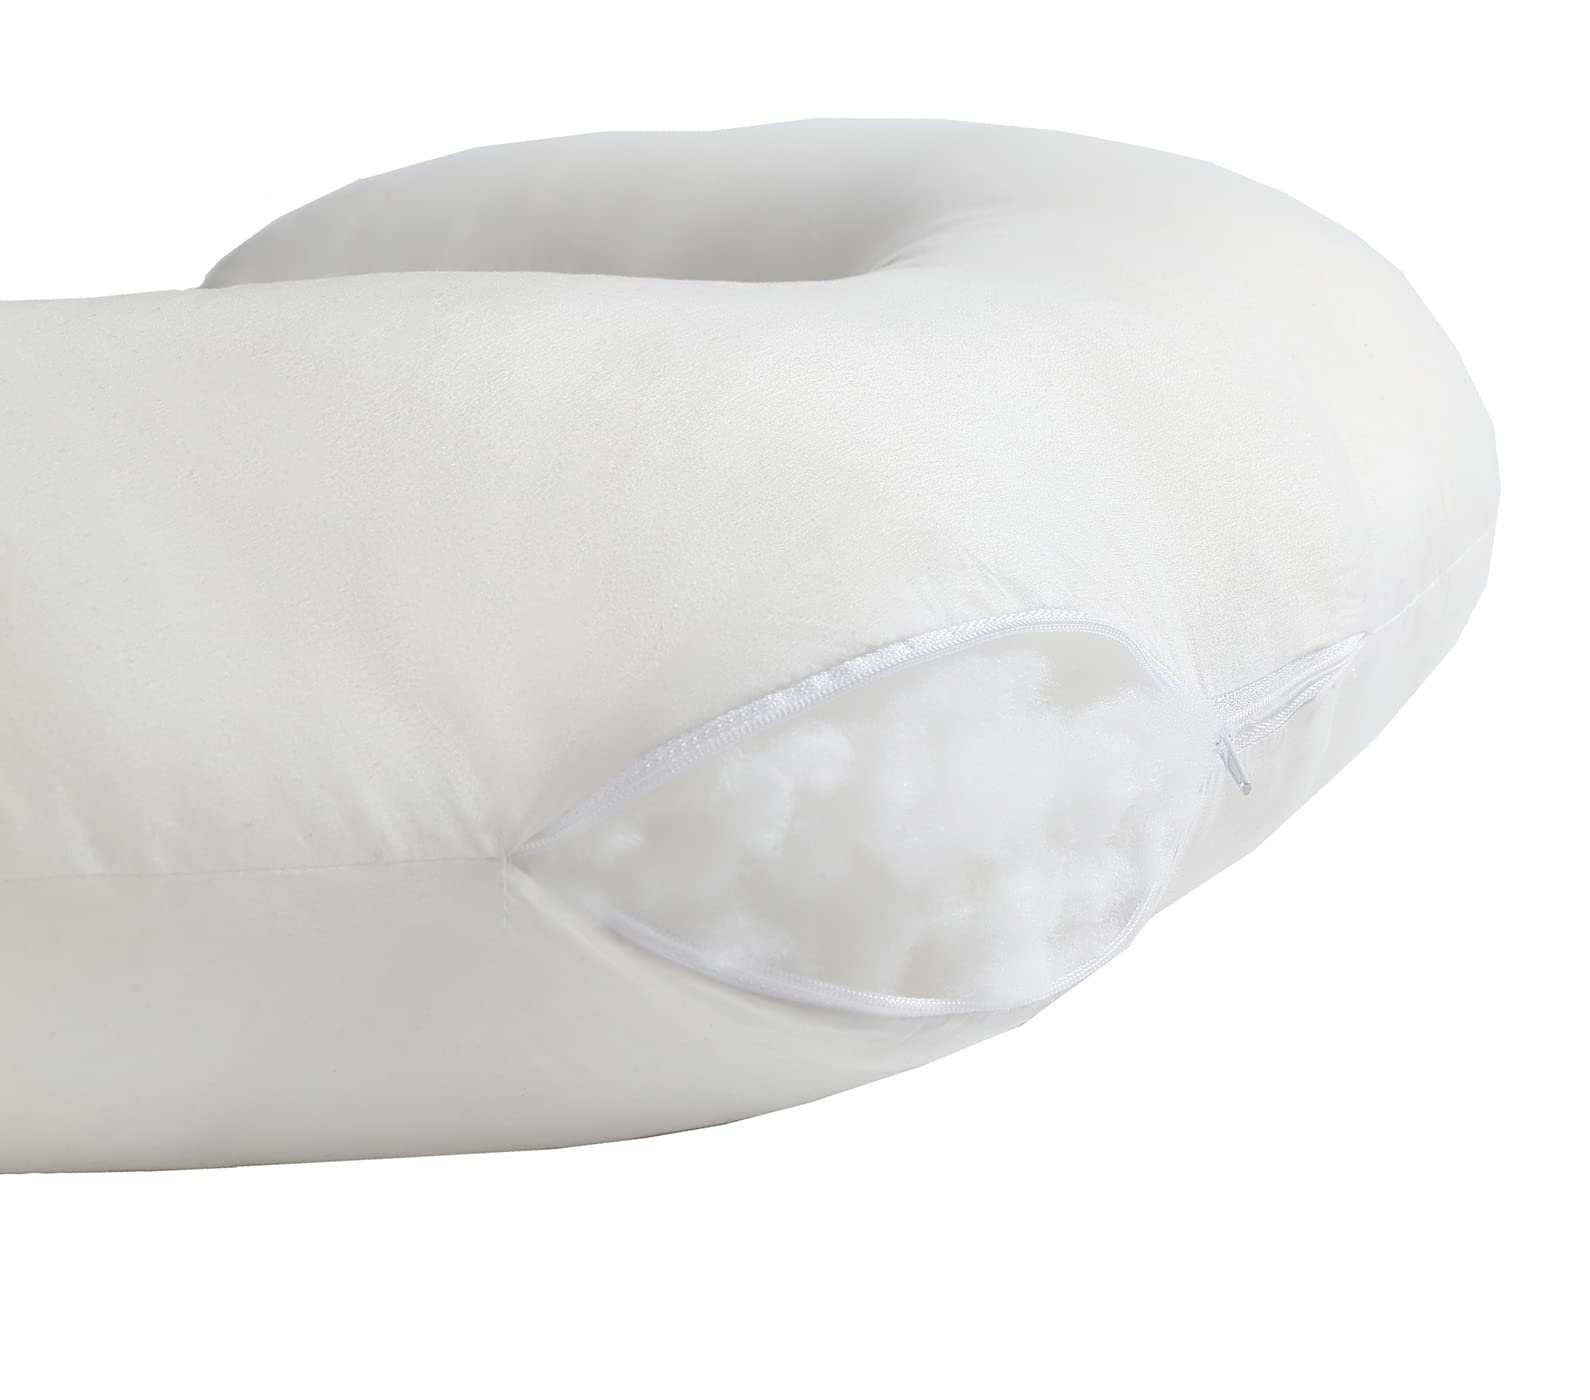 Baby Nursing Pillow and Body Positioner for Breastfeeding and Bottle Feeding for Baby Boys and Girls, Breast Feeding Pillow for Propping Baby, Tummy Time, Sitting Support, Naked Pillow